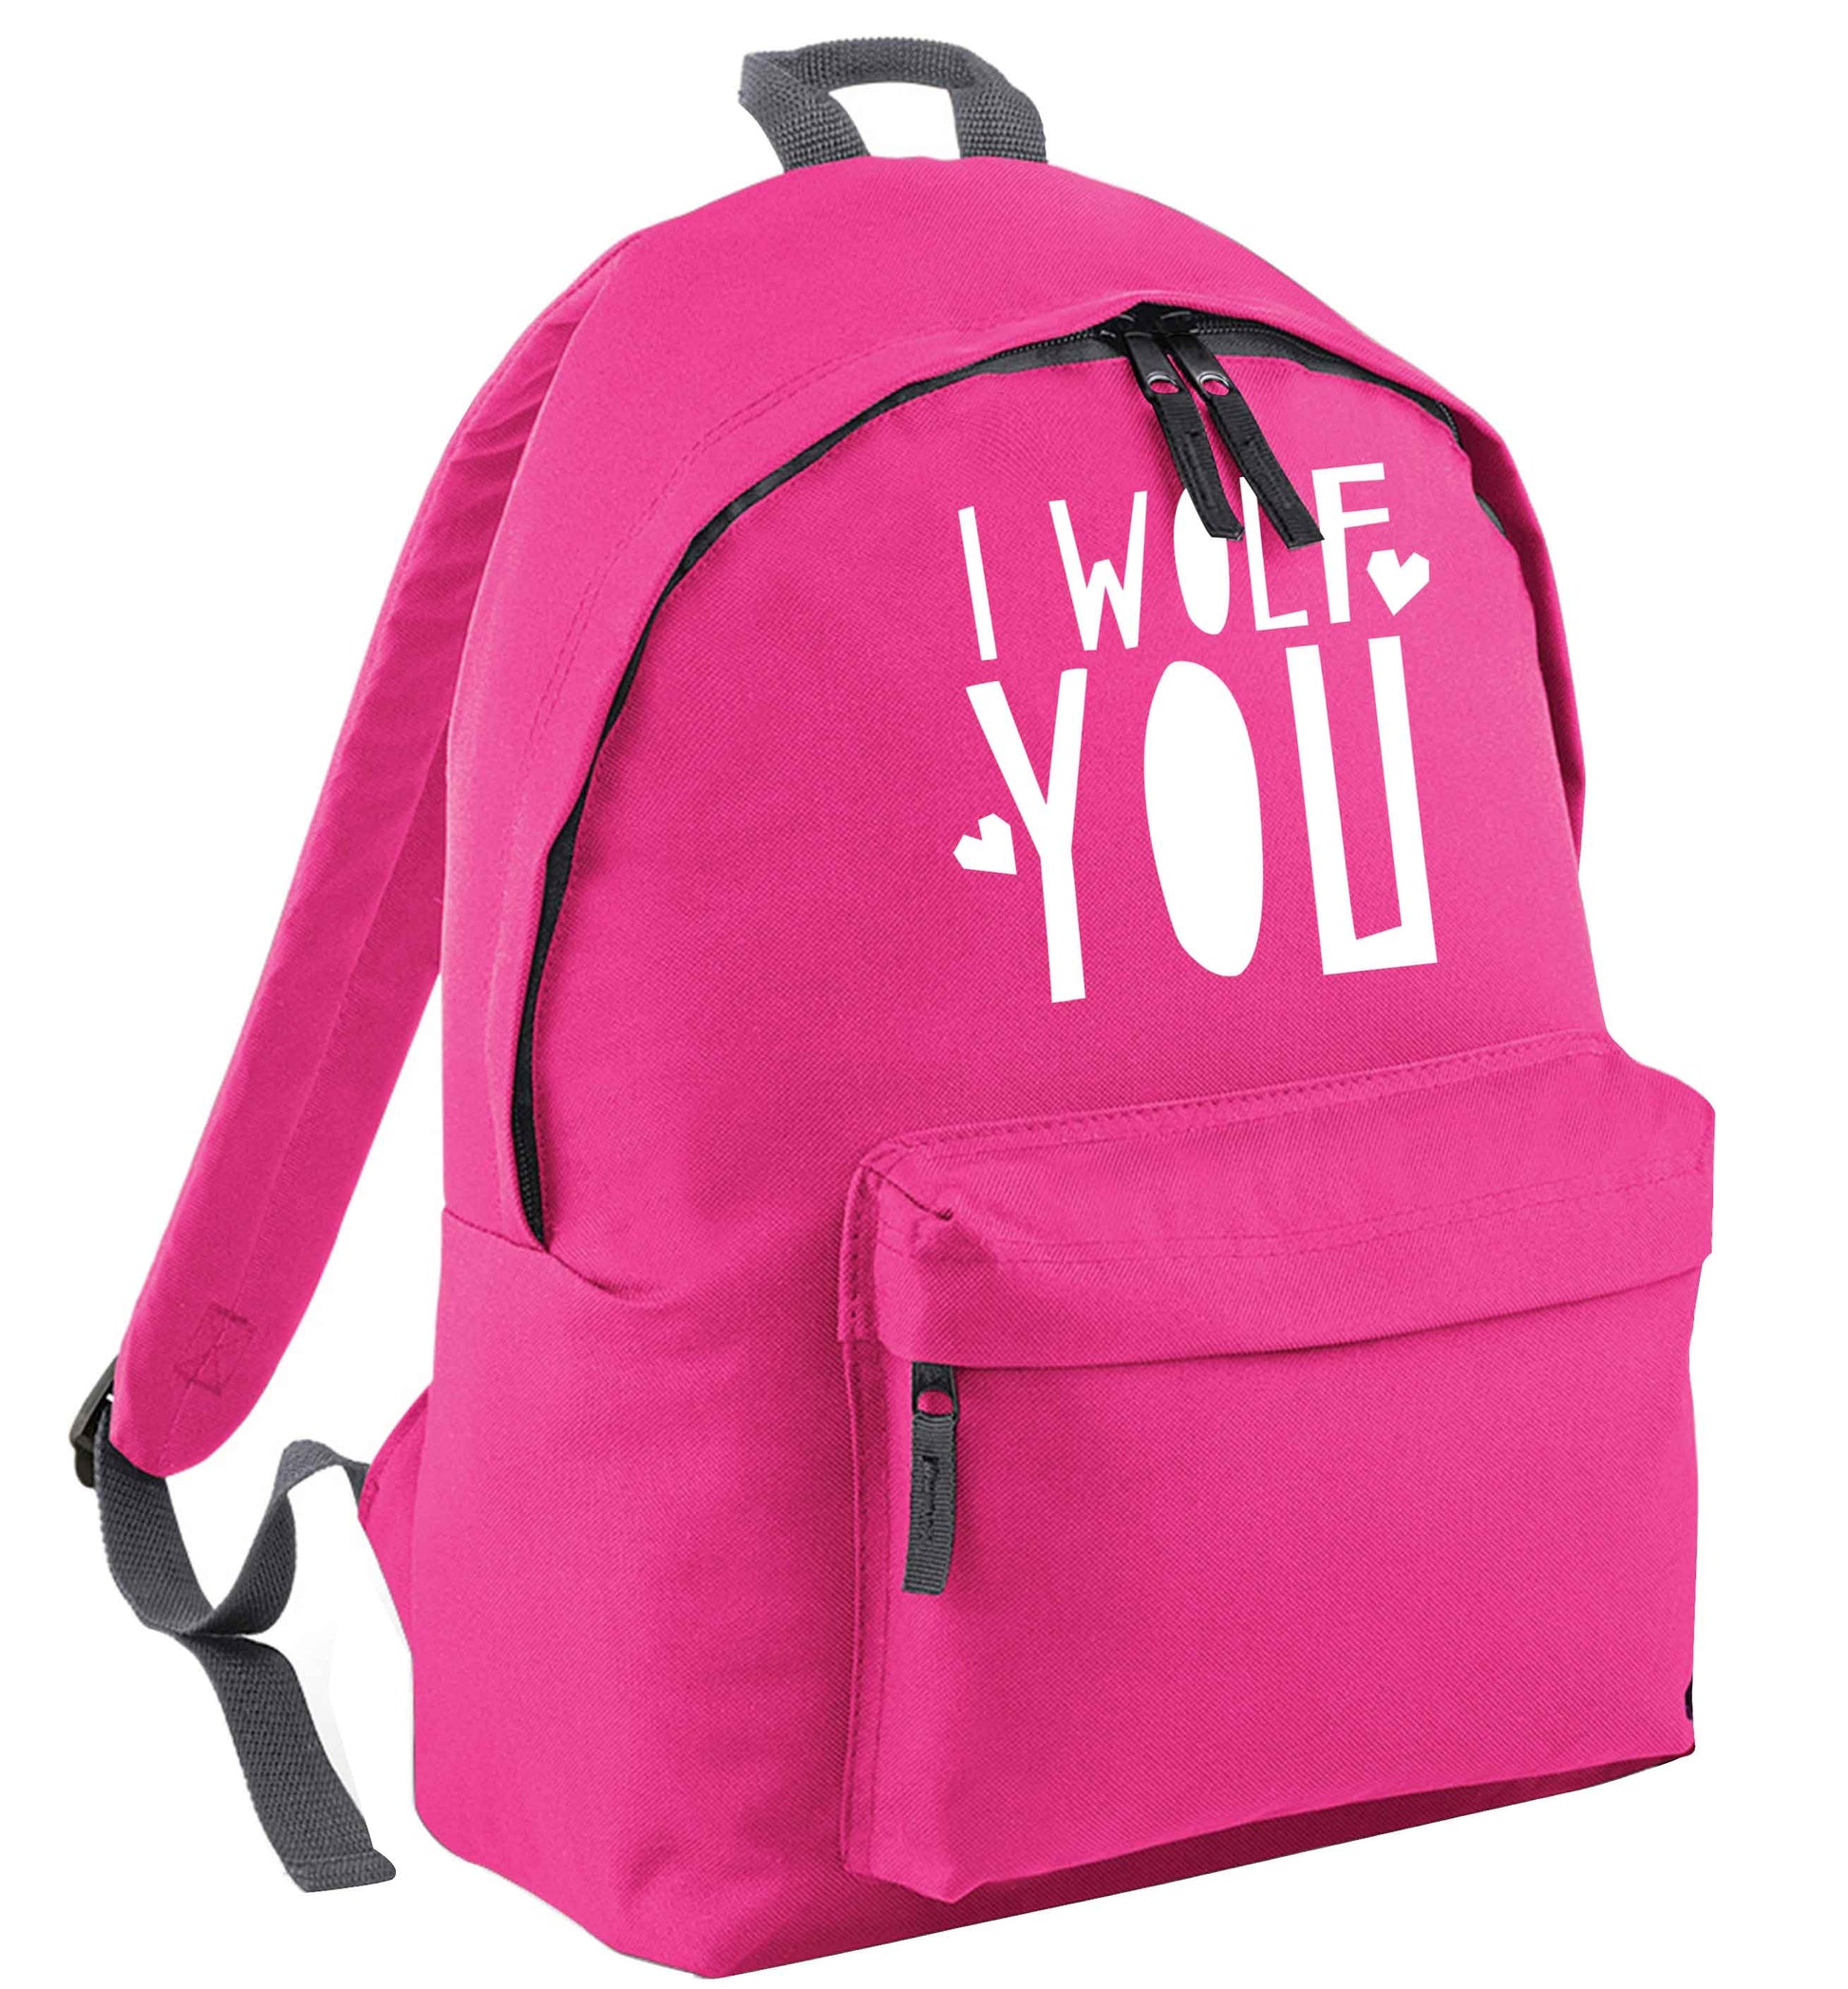 I wolf you pink adults backpack